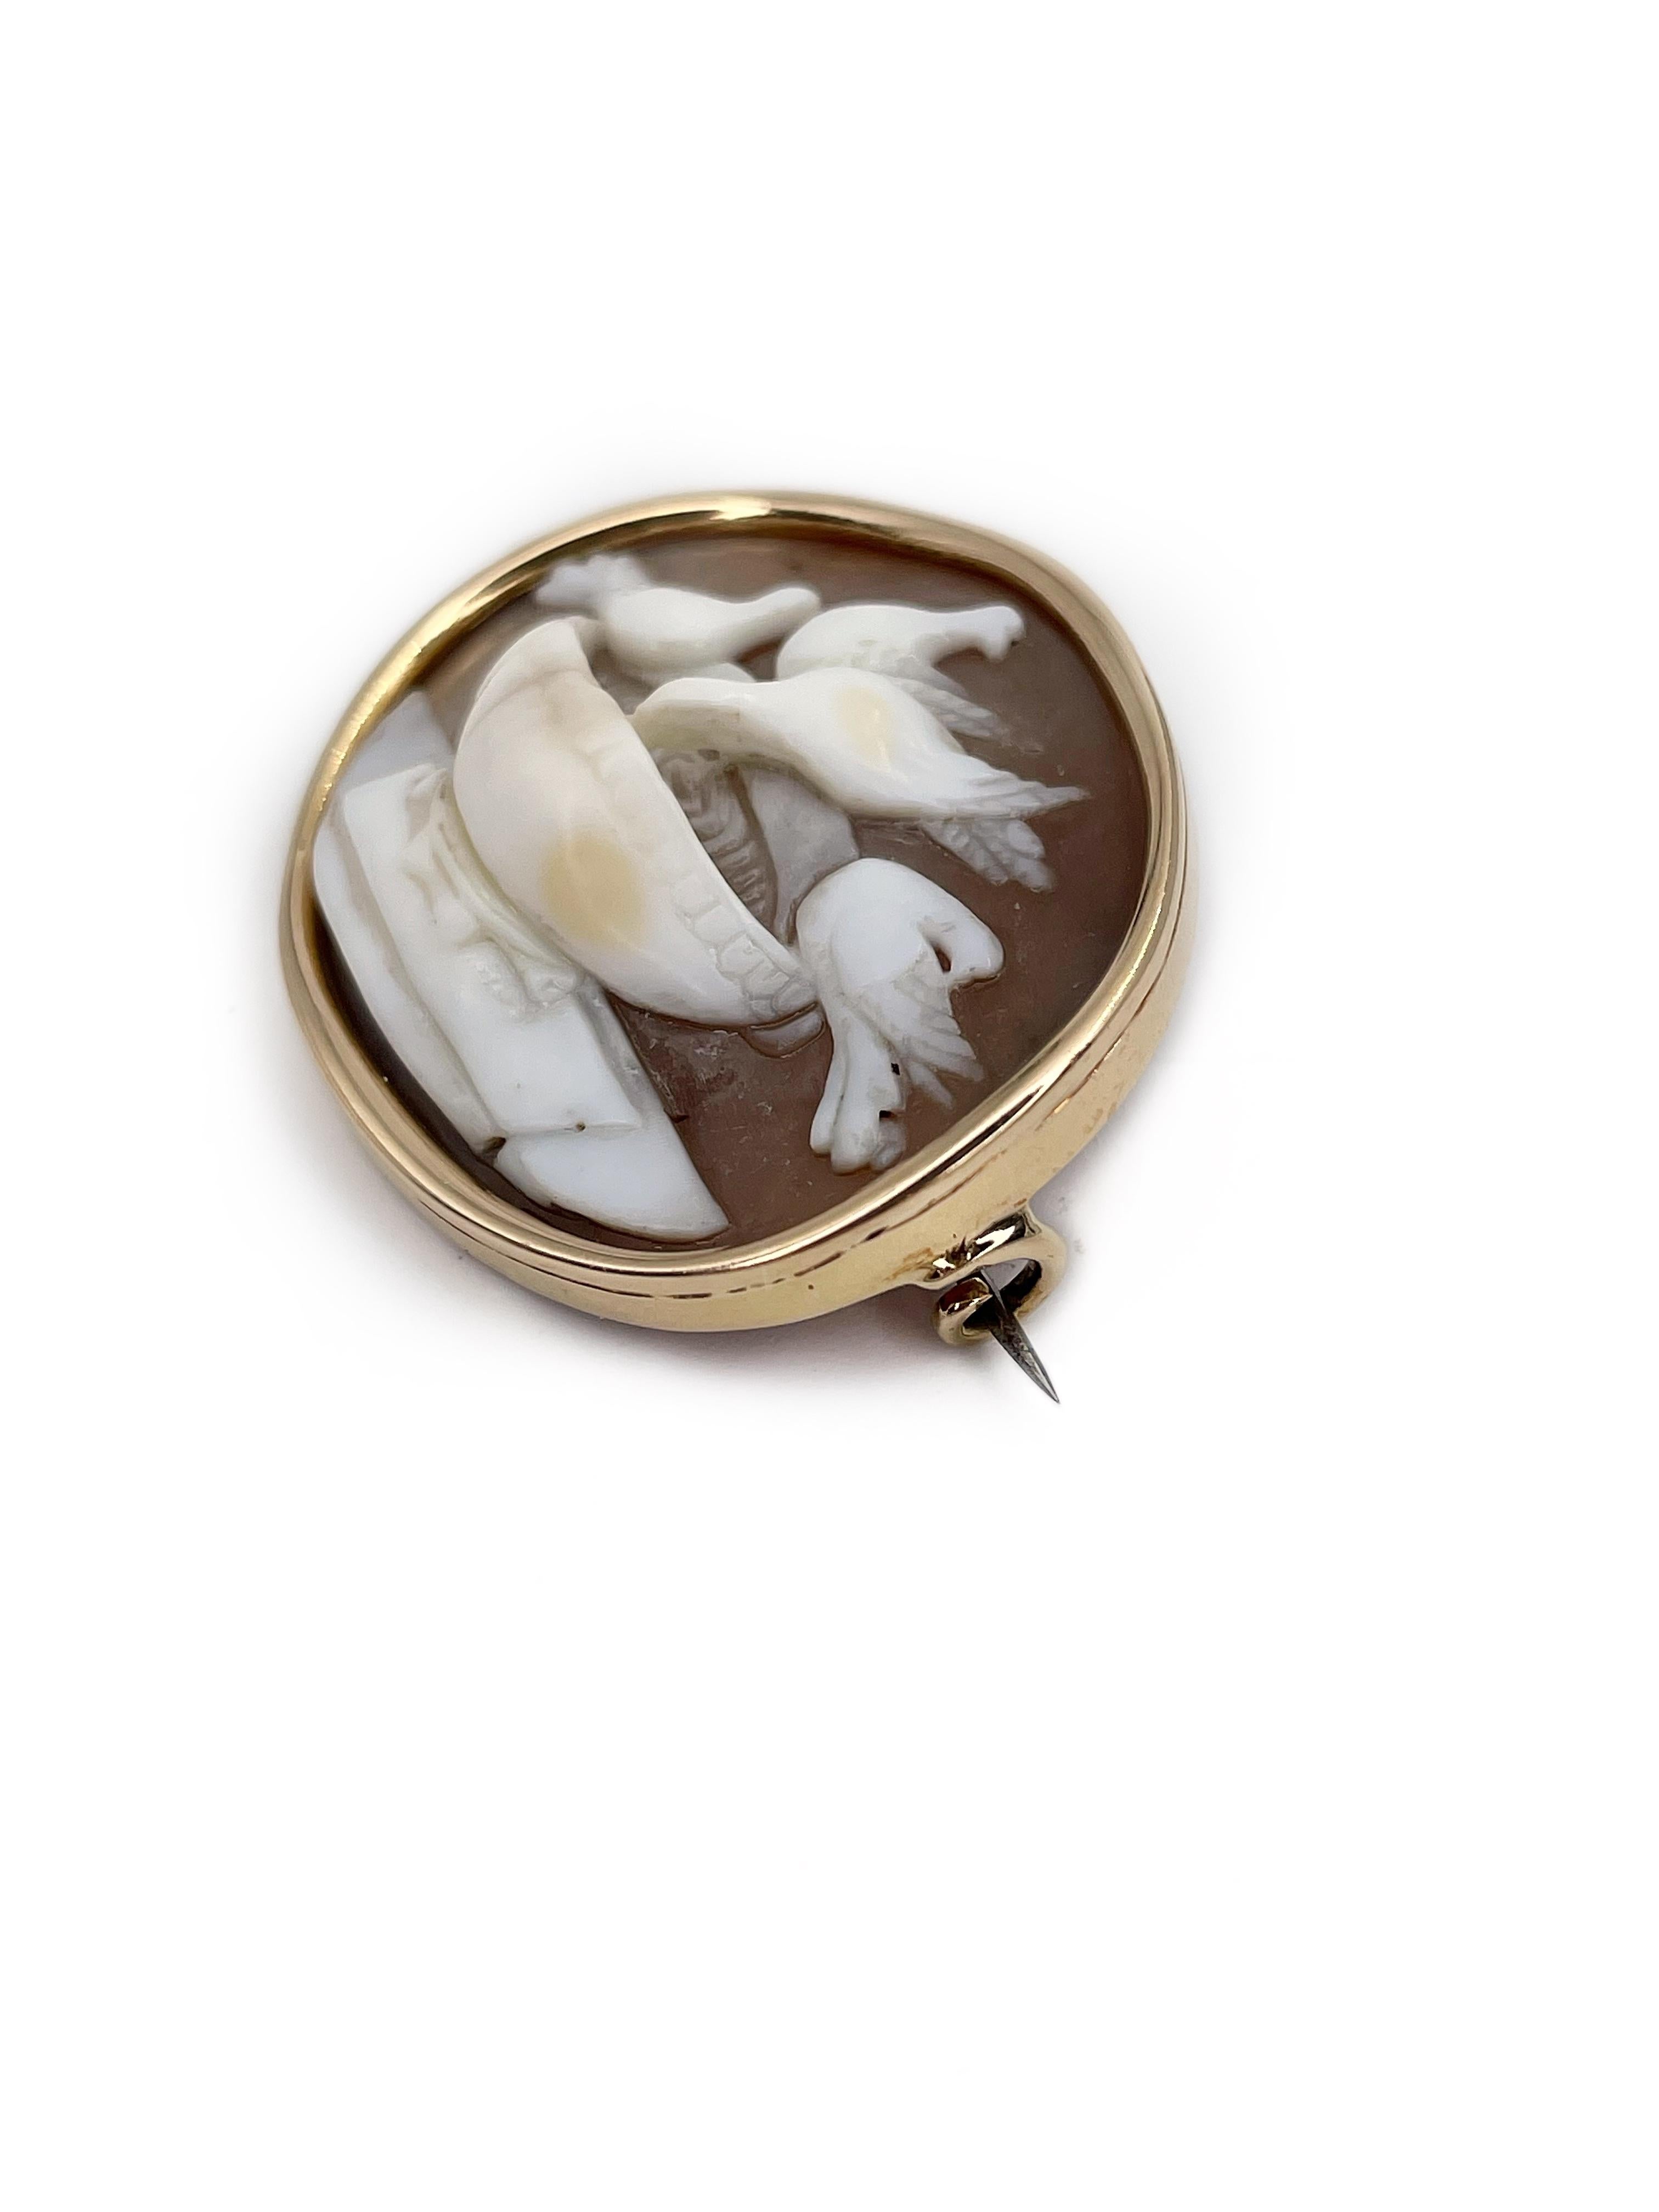 This is a lovely brooch crafted in 14K gold. It depicts four doves sitting on a bowl. The cameo is delicately carved from shell. 

Weight: 8.01g
Size: 3.5x2.8cm